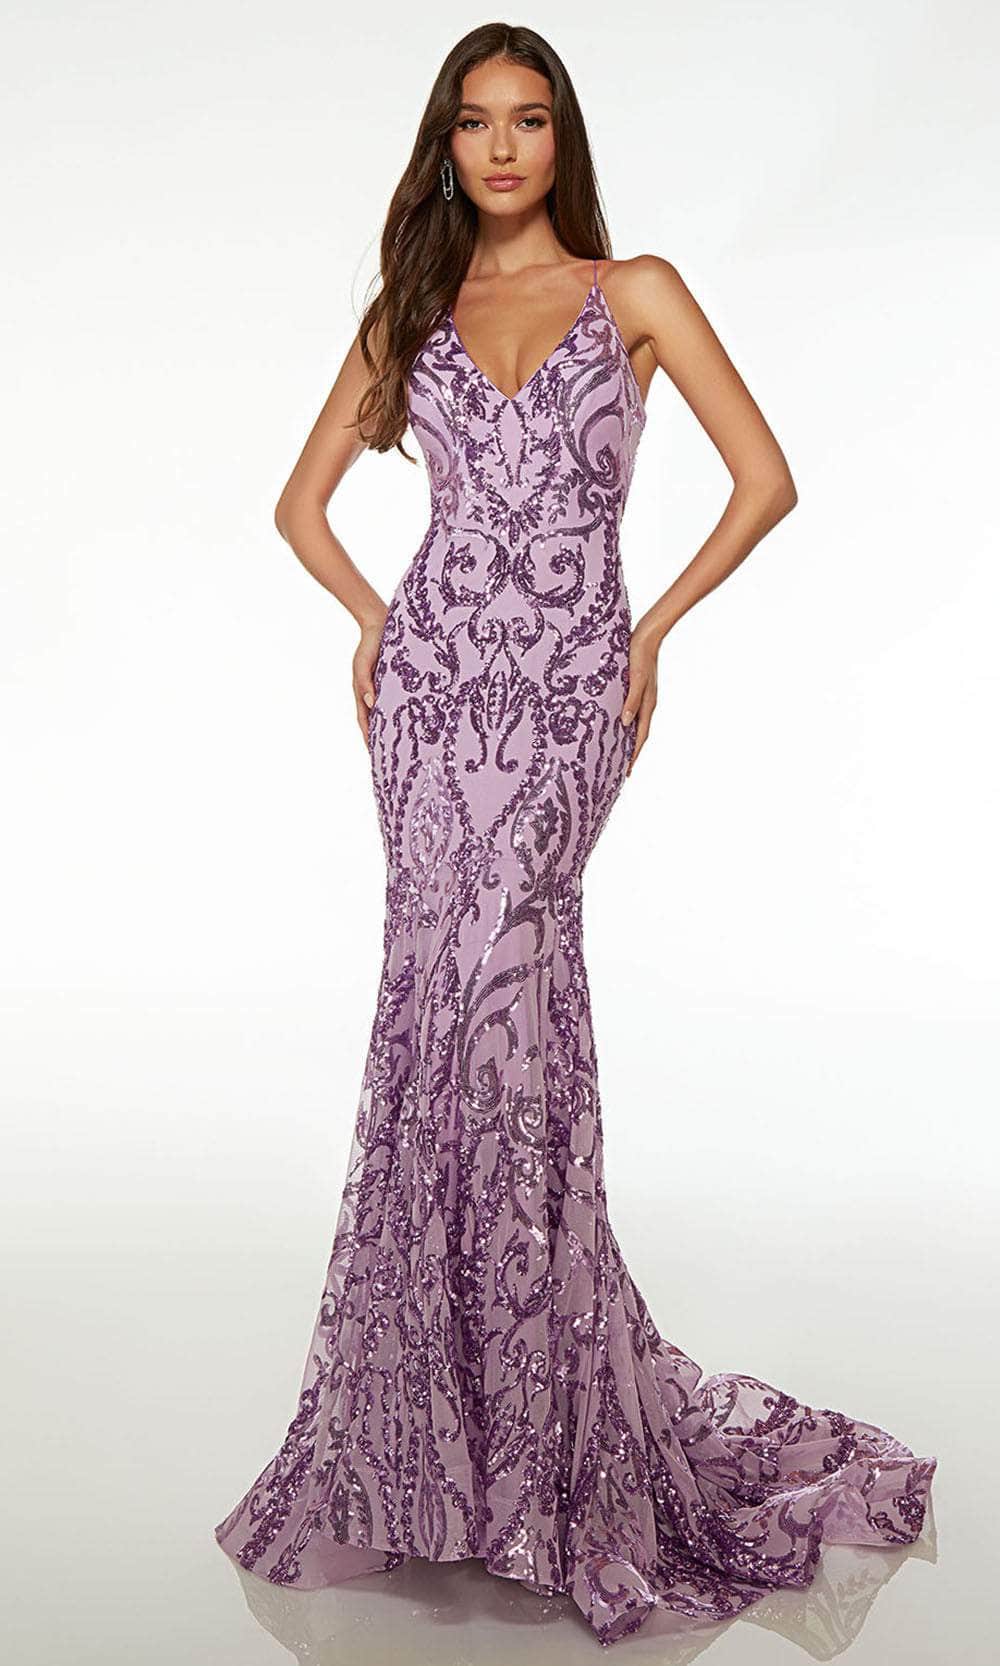 Image of Alyce Paris 61659 - Sequin Embellished Fitted Sleeveless Prom Dress